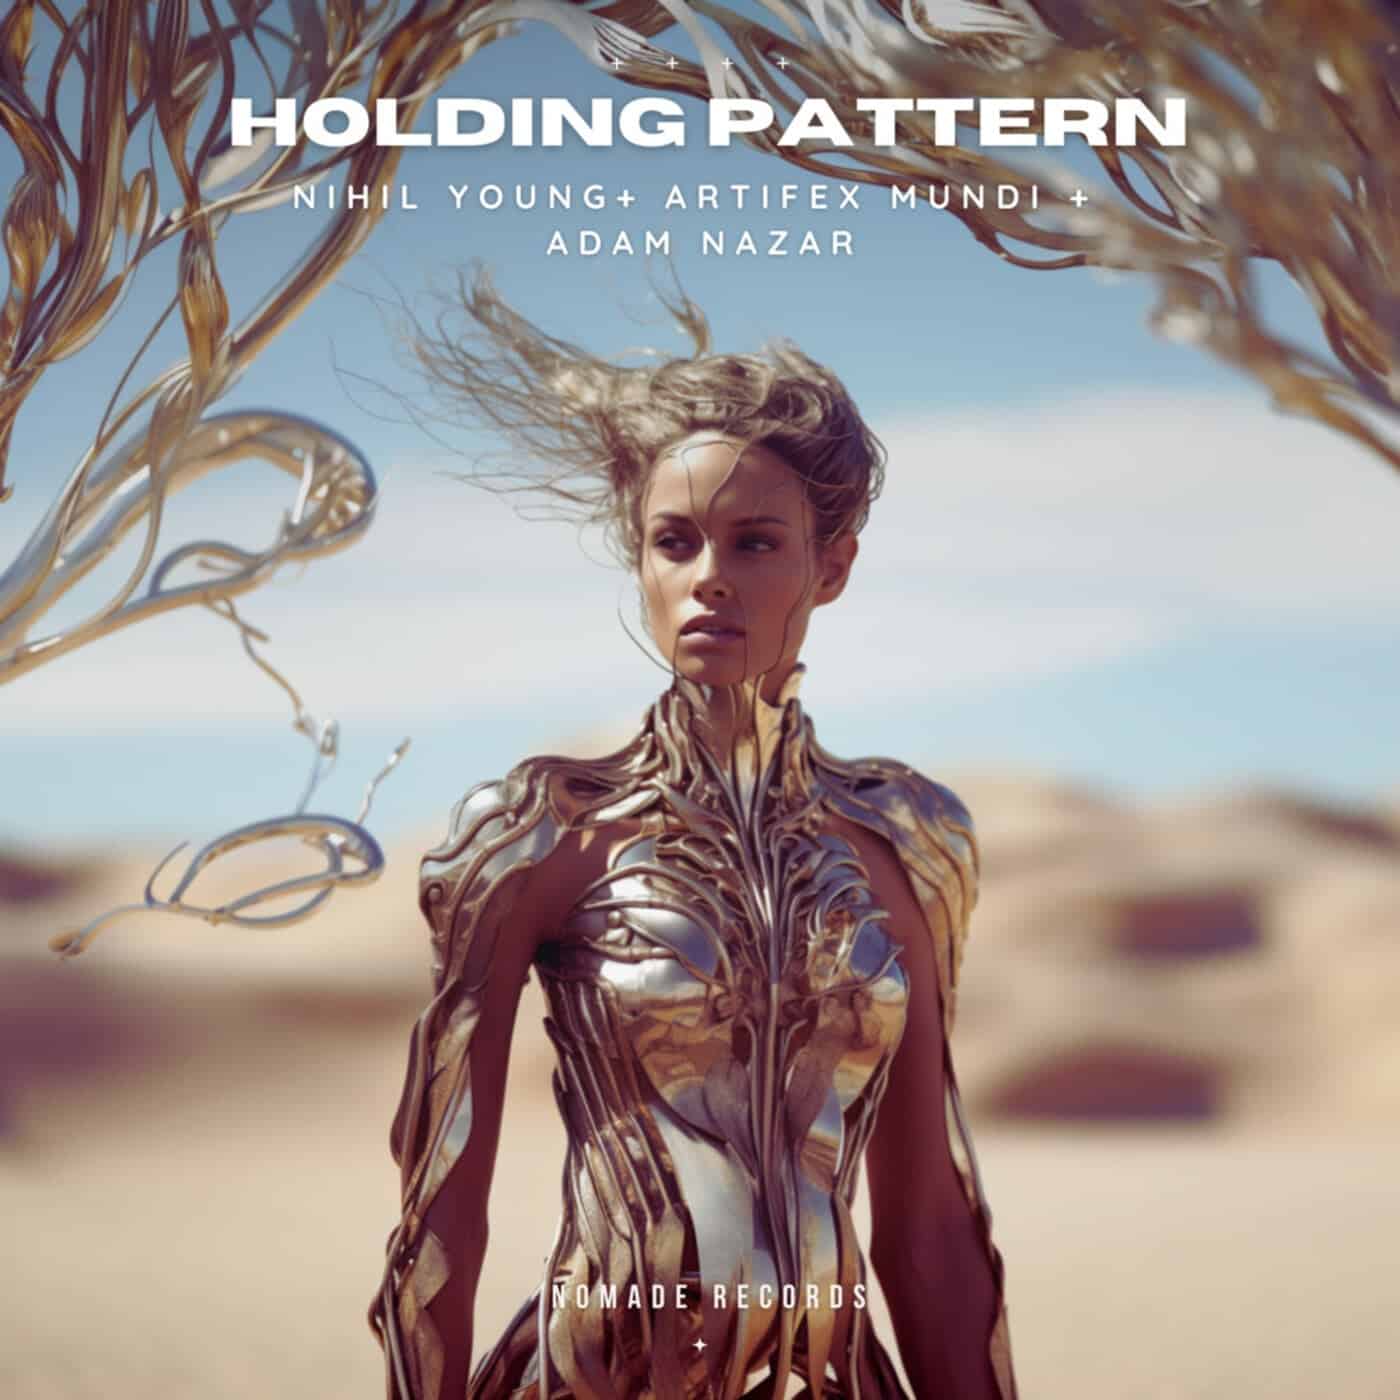 image cover: Nihil Young, Adam Nazar, Artifex Mundi - Holding Pattern on Nomade Records (DE)